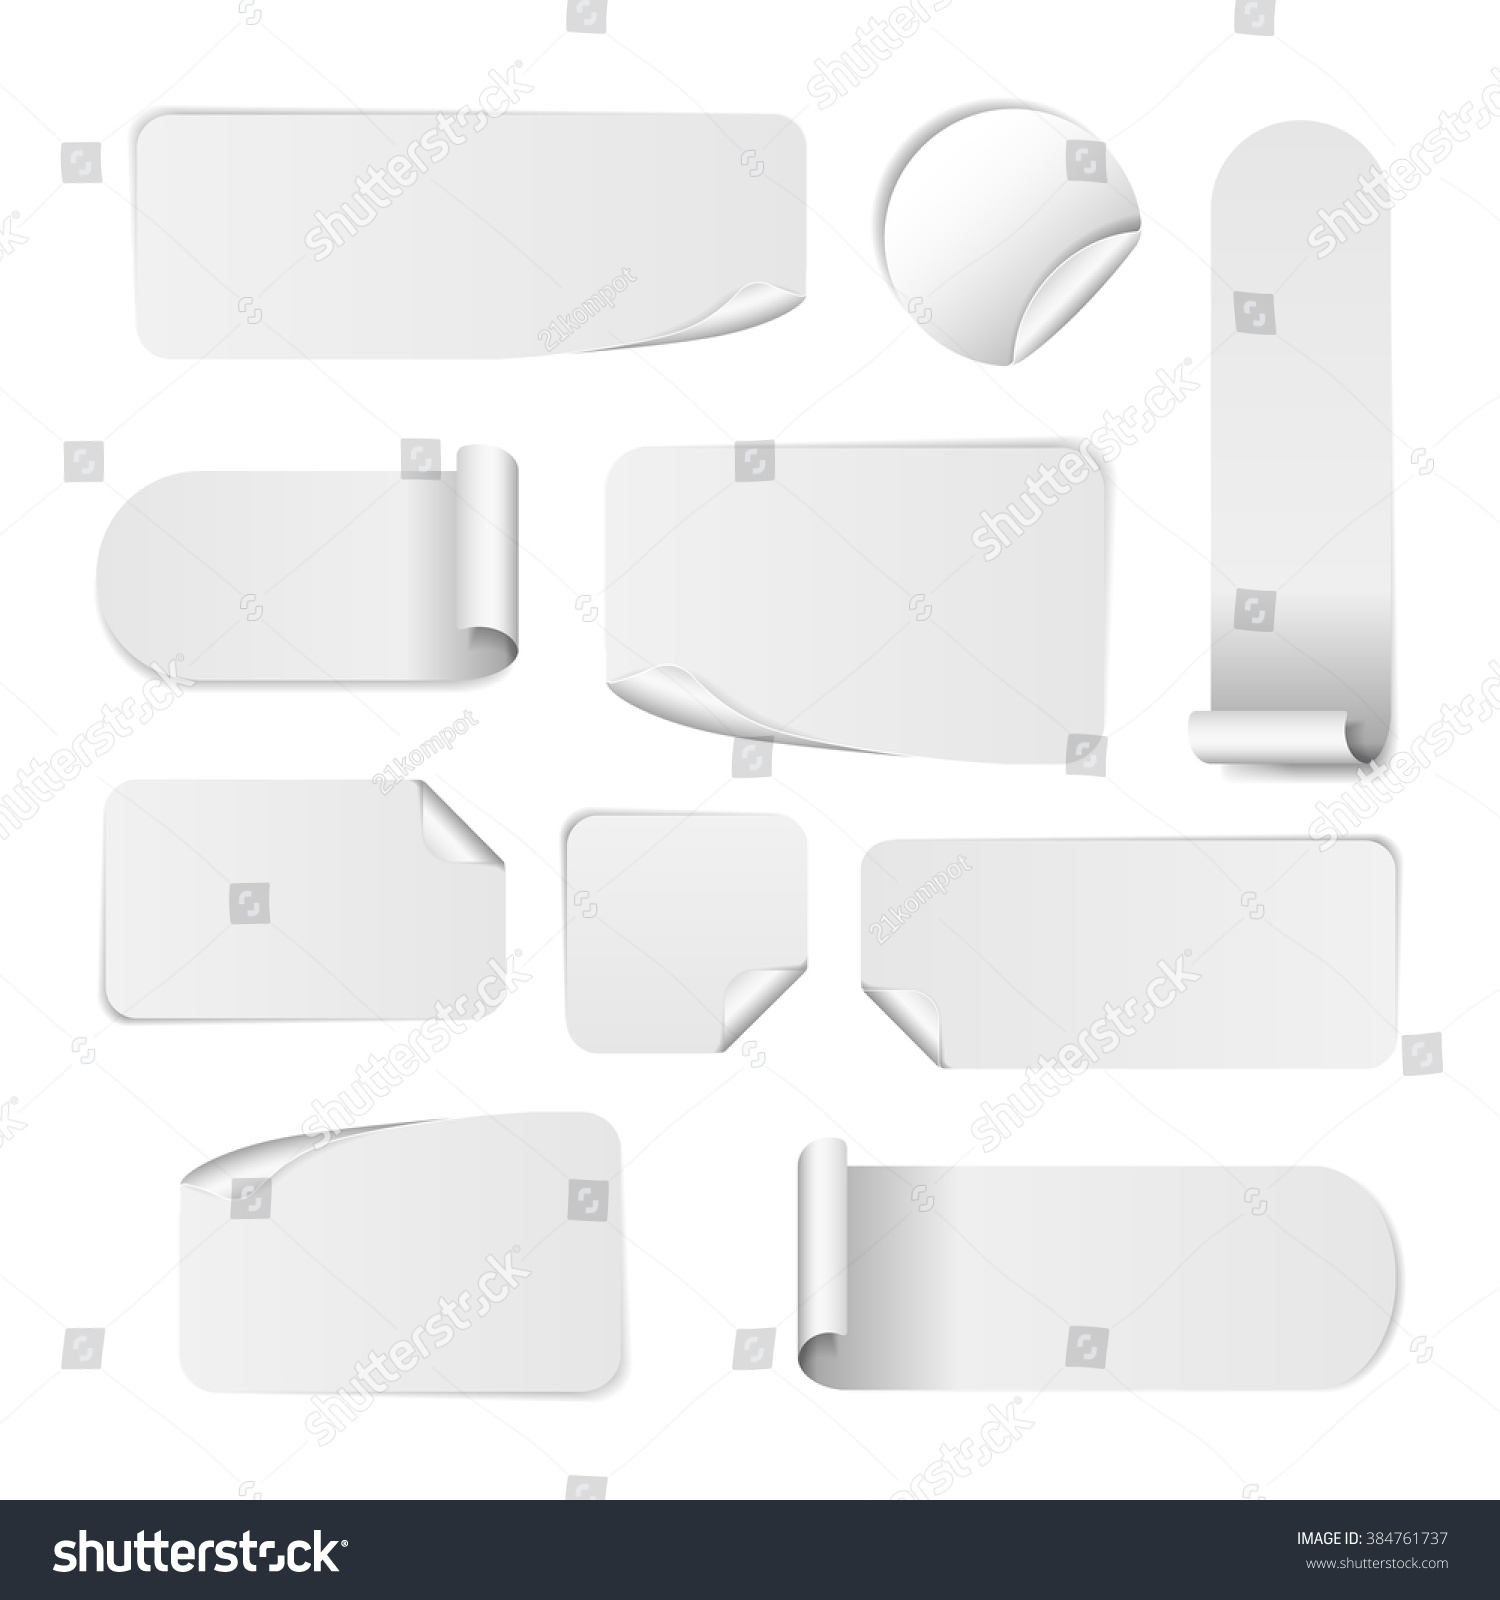 Blank white paper stickers isolated on white background. Round, square and rectangular sticker template. Sale and Clearance  banners. Big Sale promotion.  #384761737